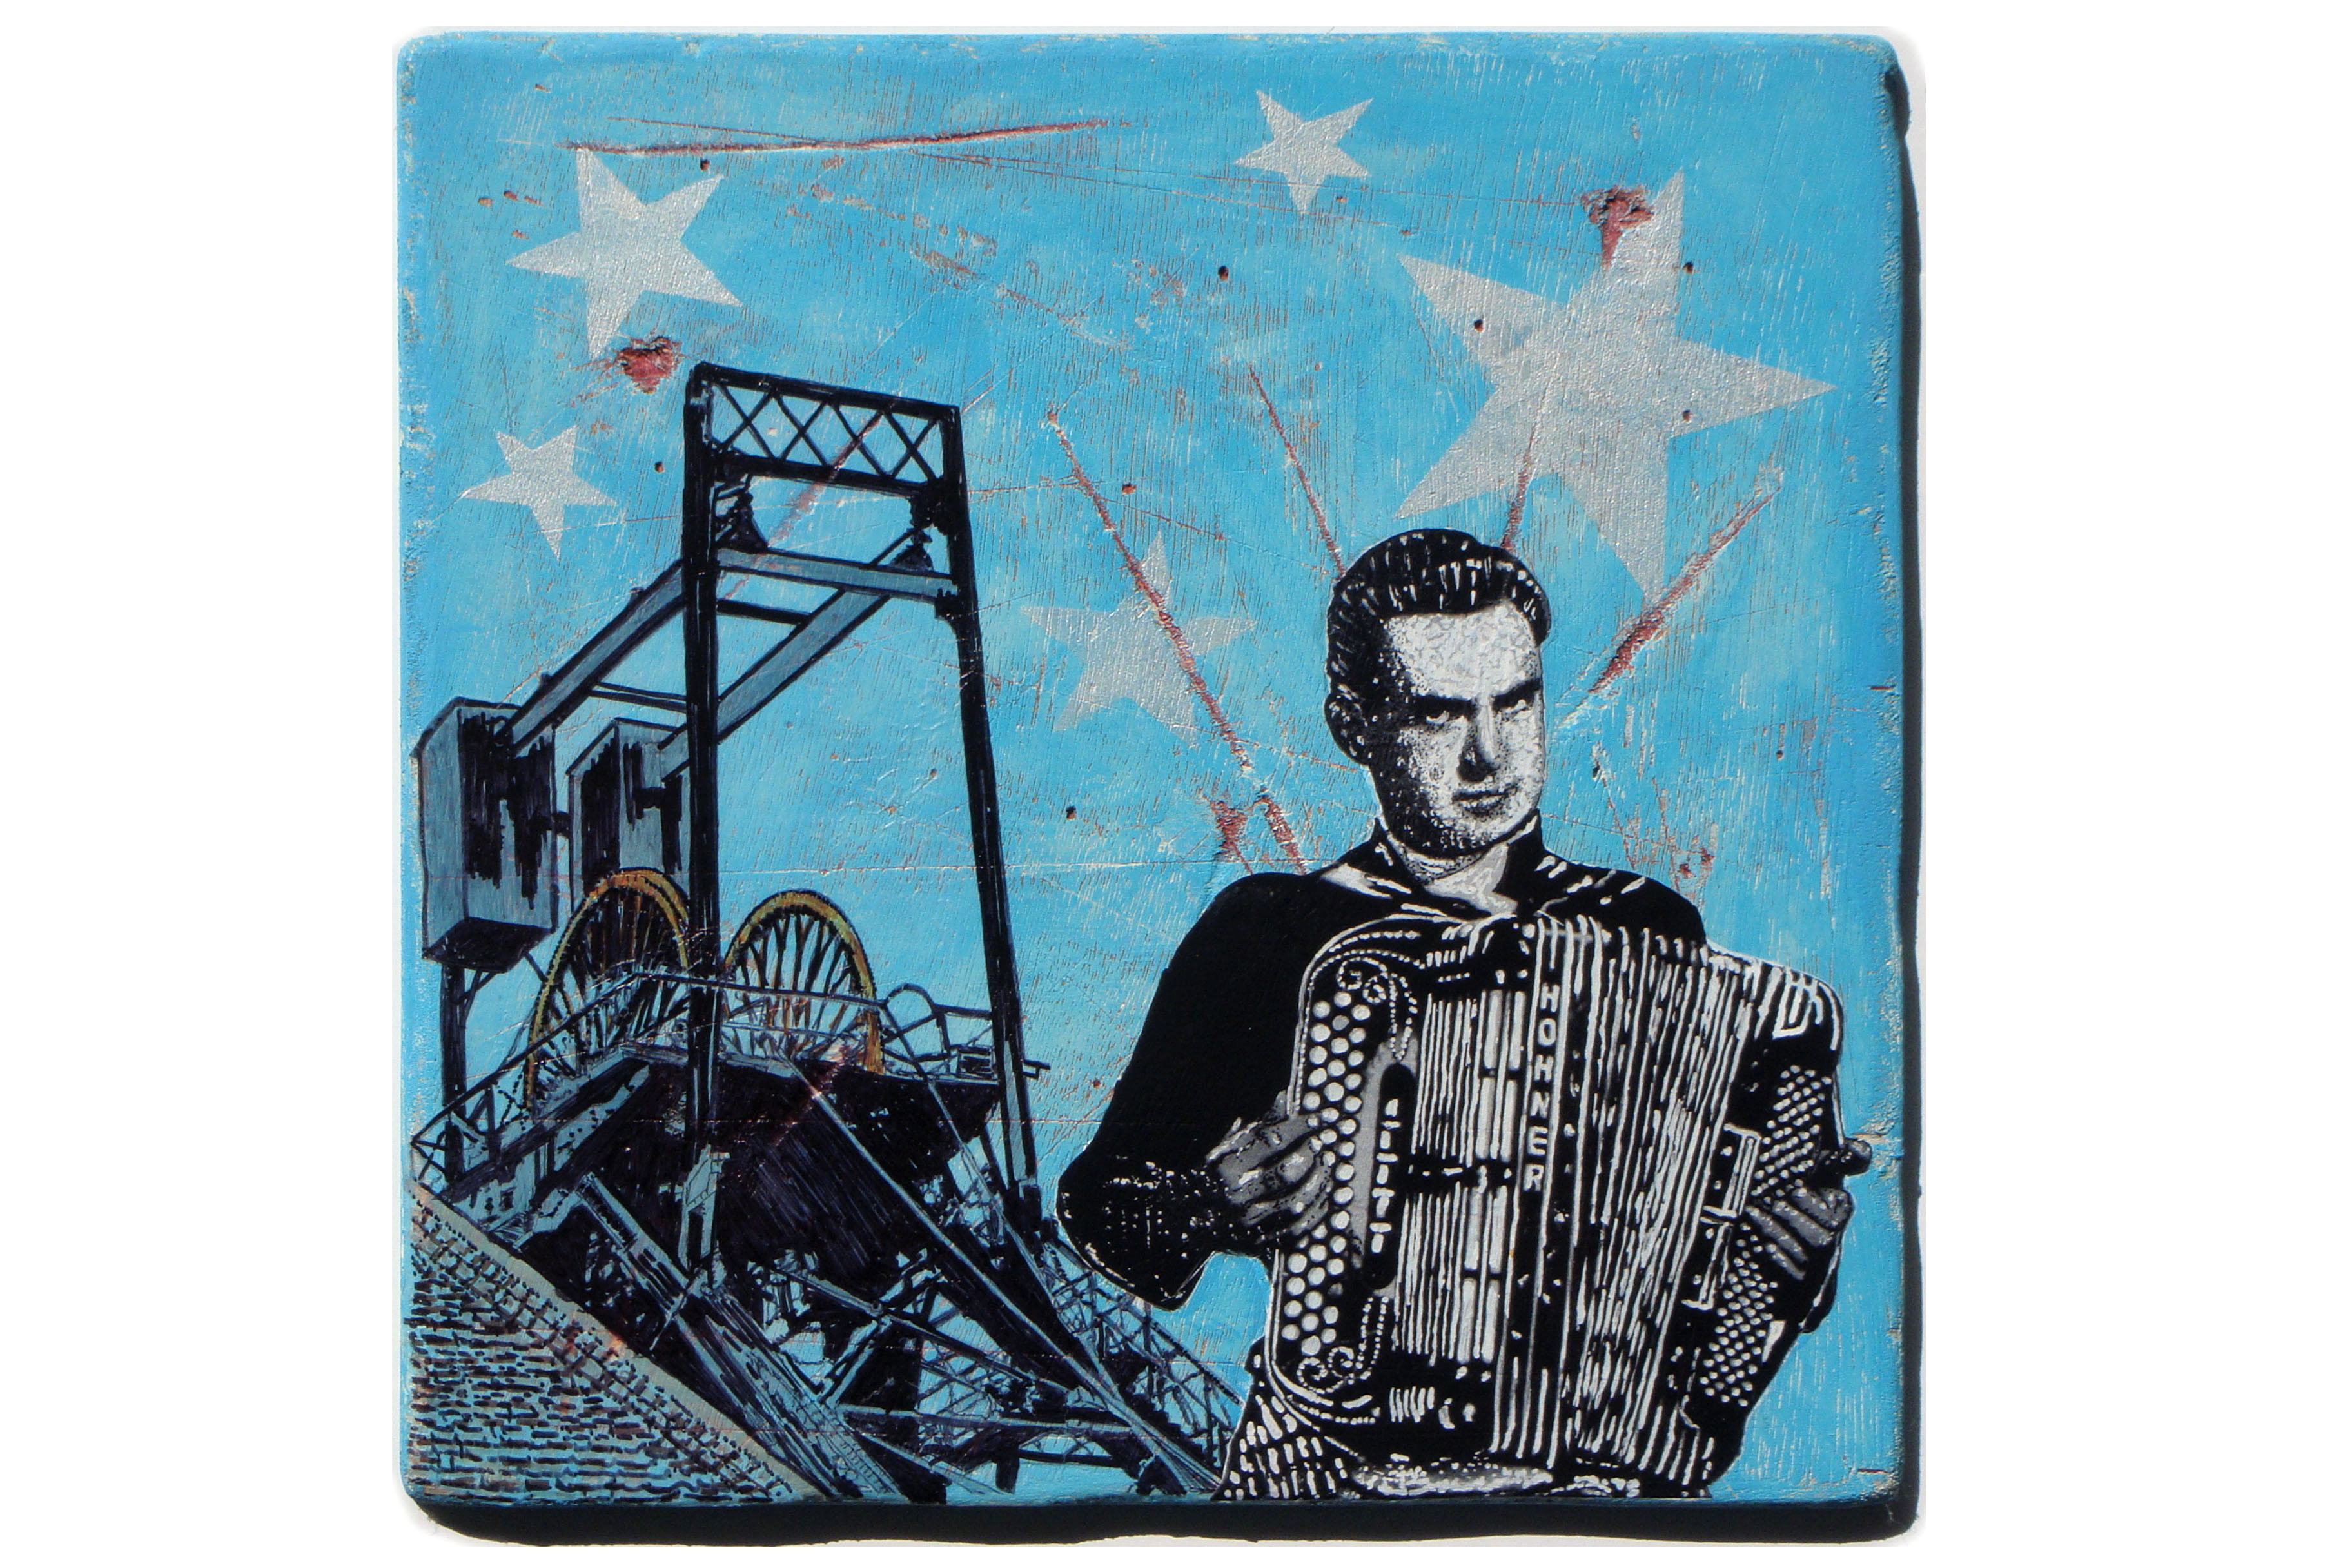 WILL STARR<br>Mixed media on plywood<br>34 x 34cm